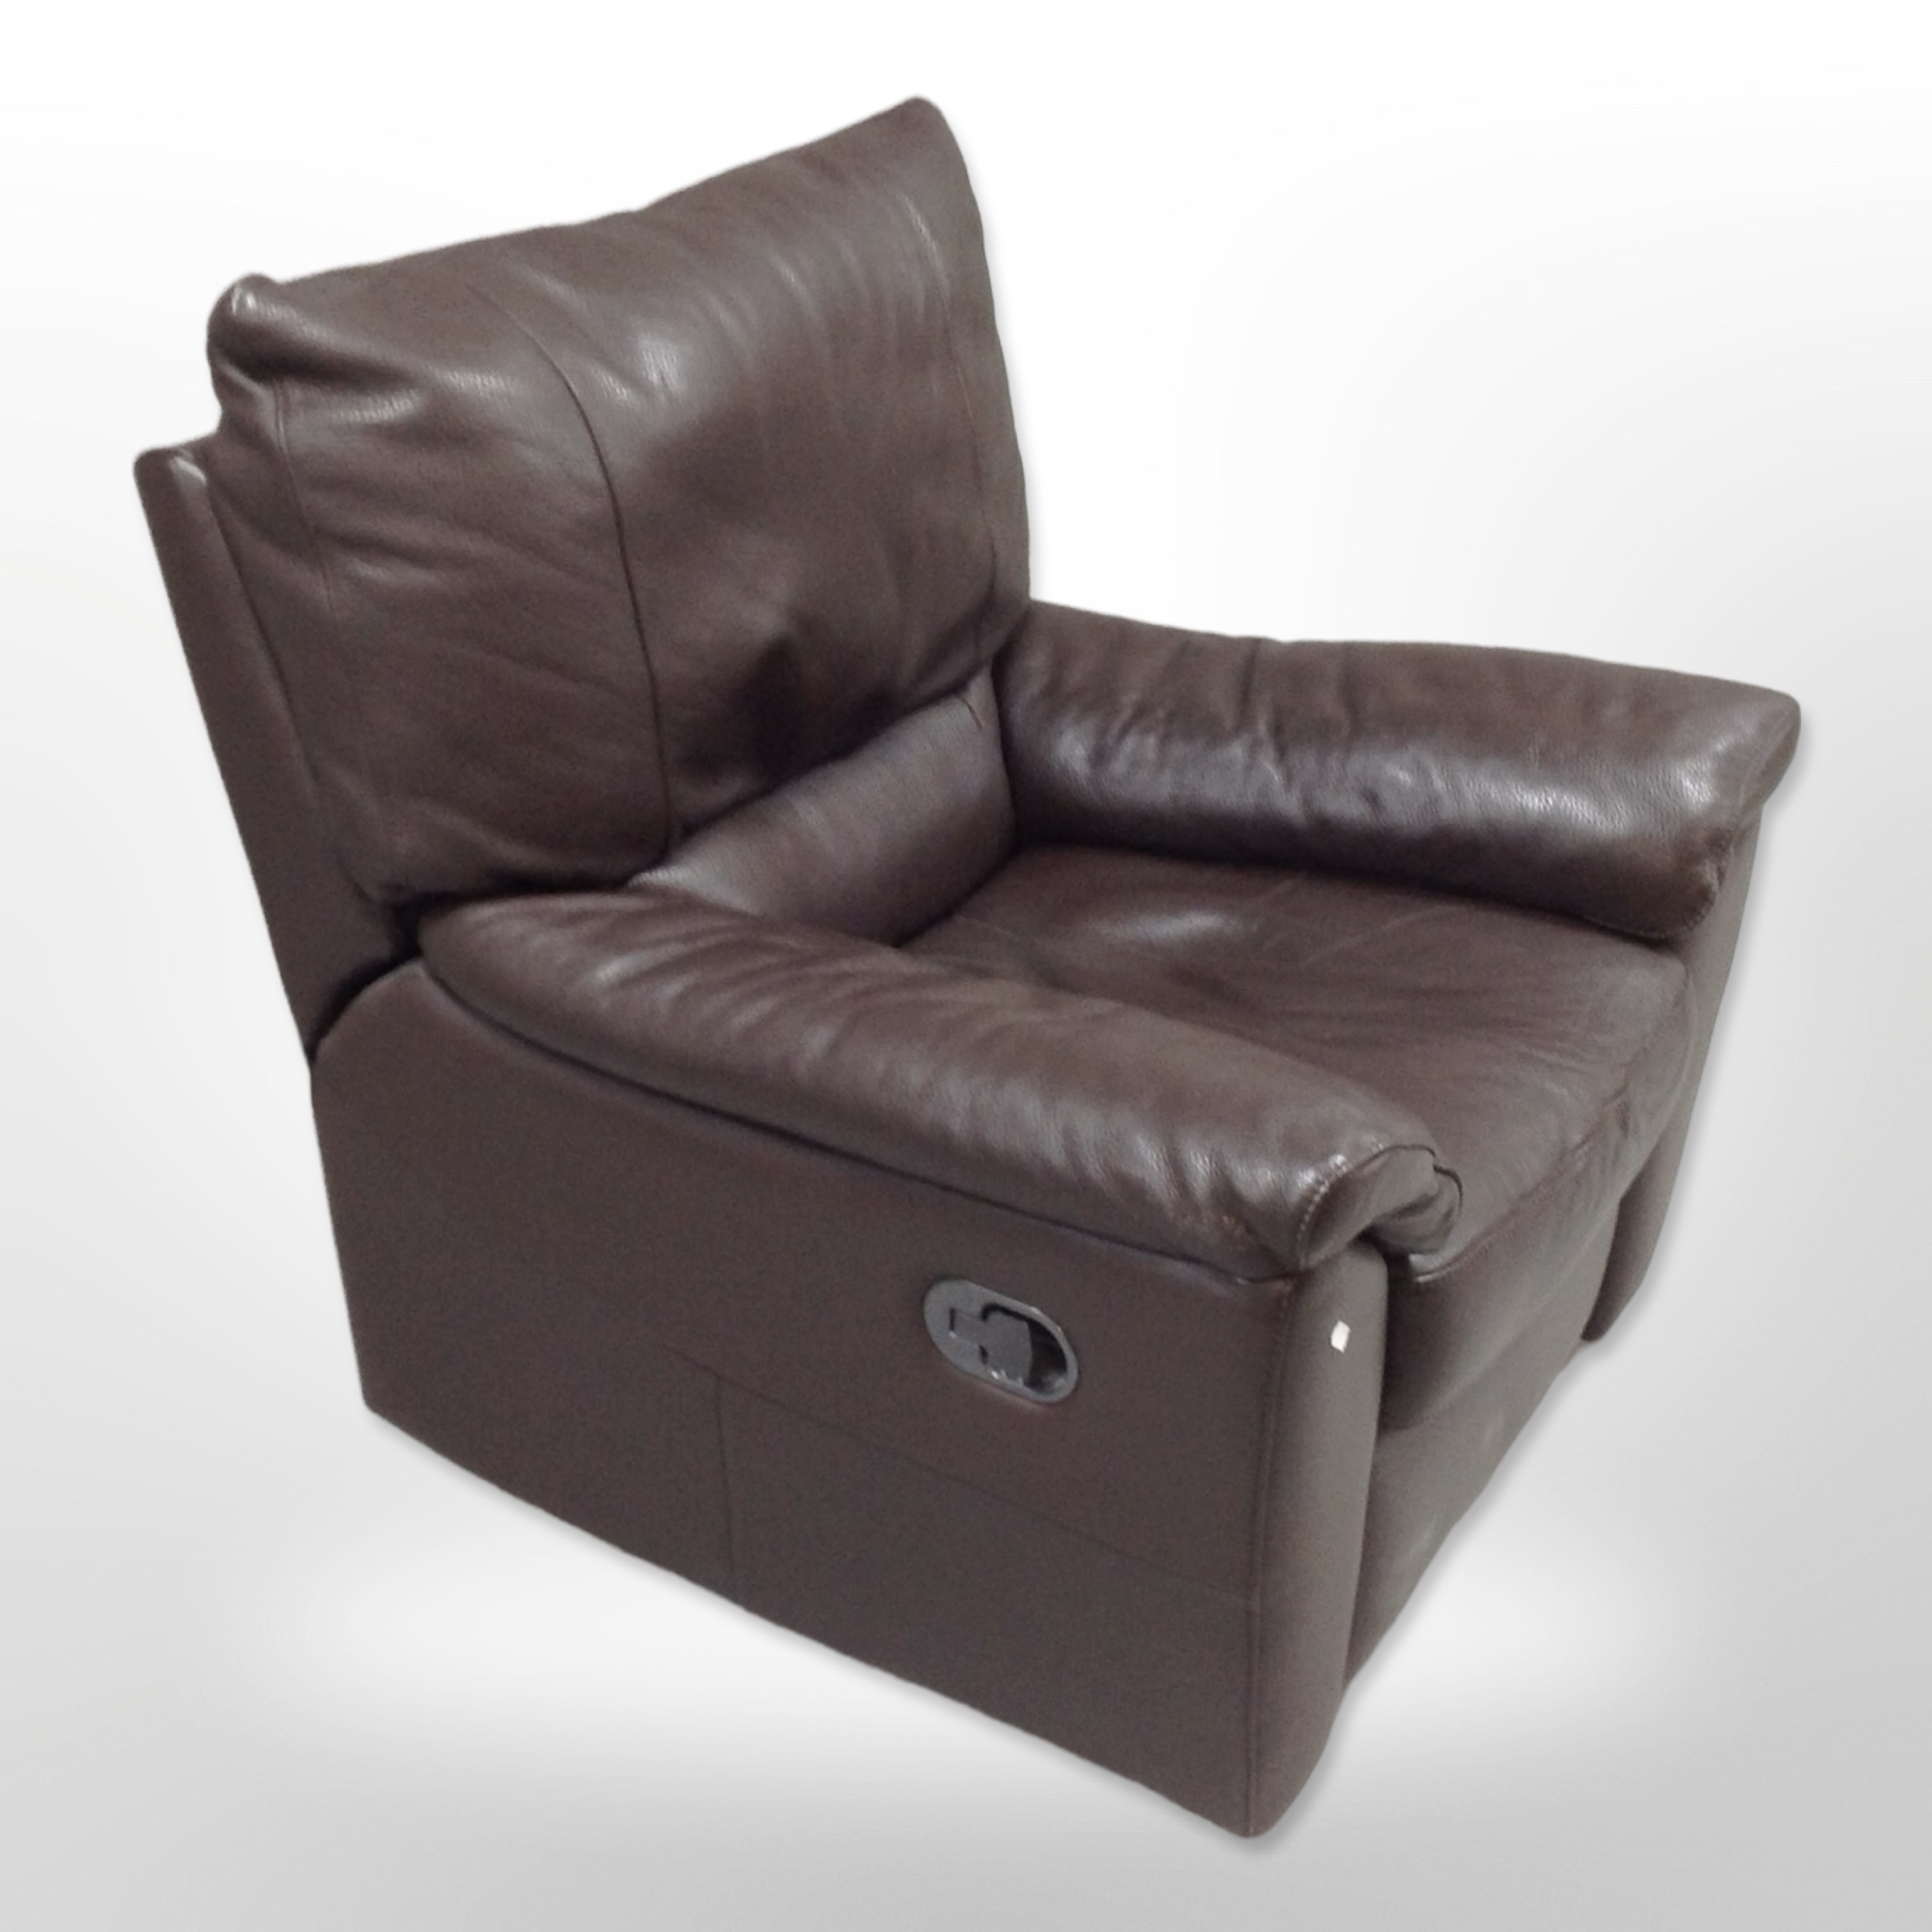 A contemporary stitched leather three seater settee, - Image 2 of 2